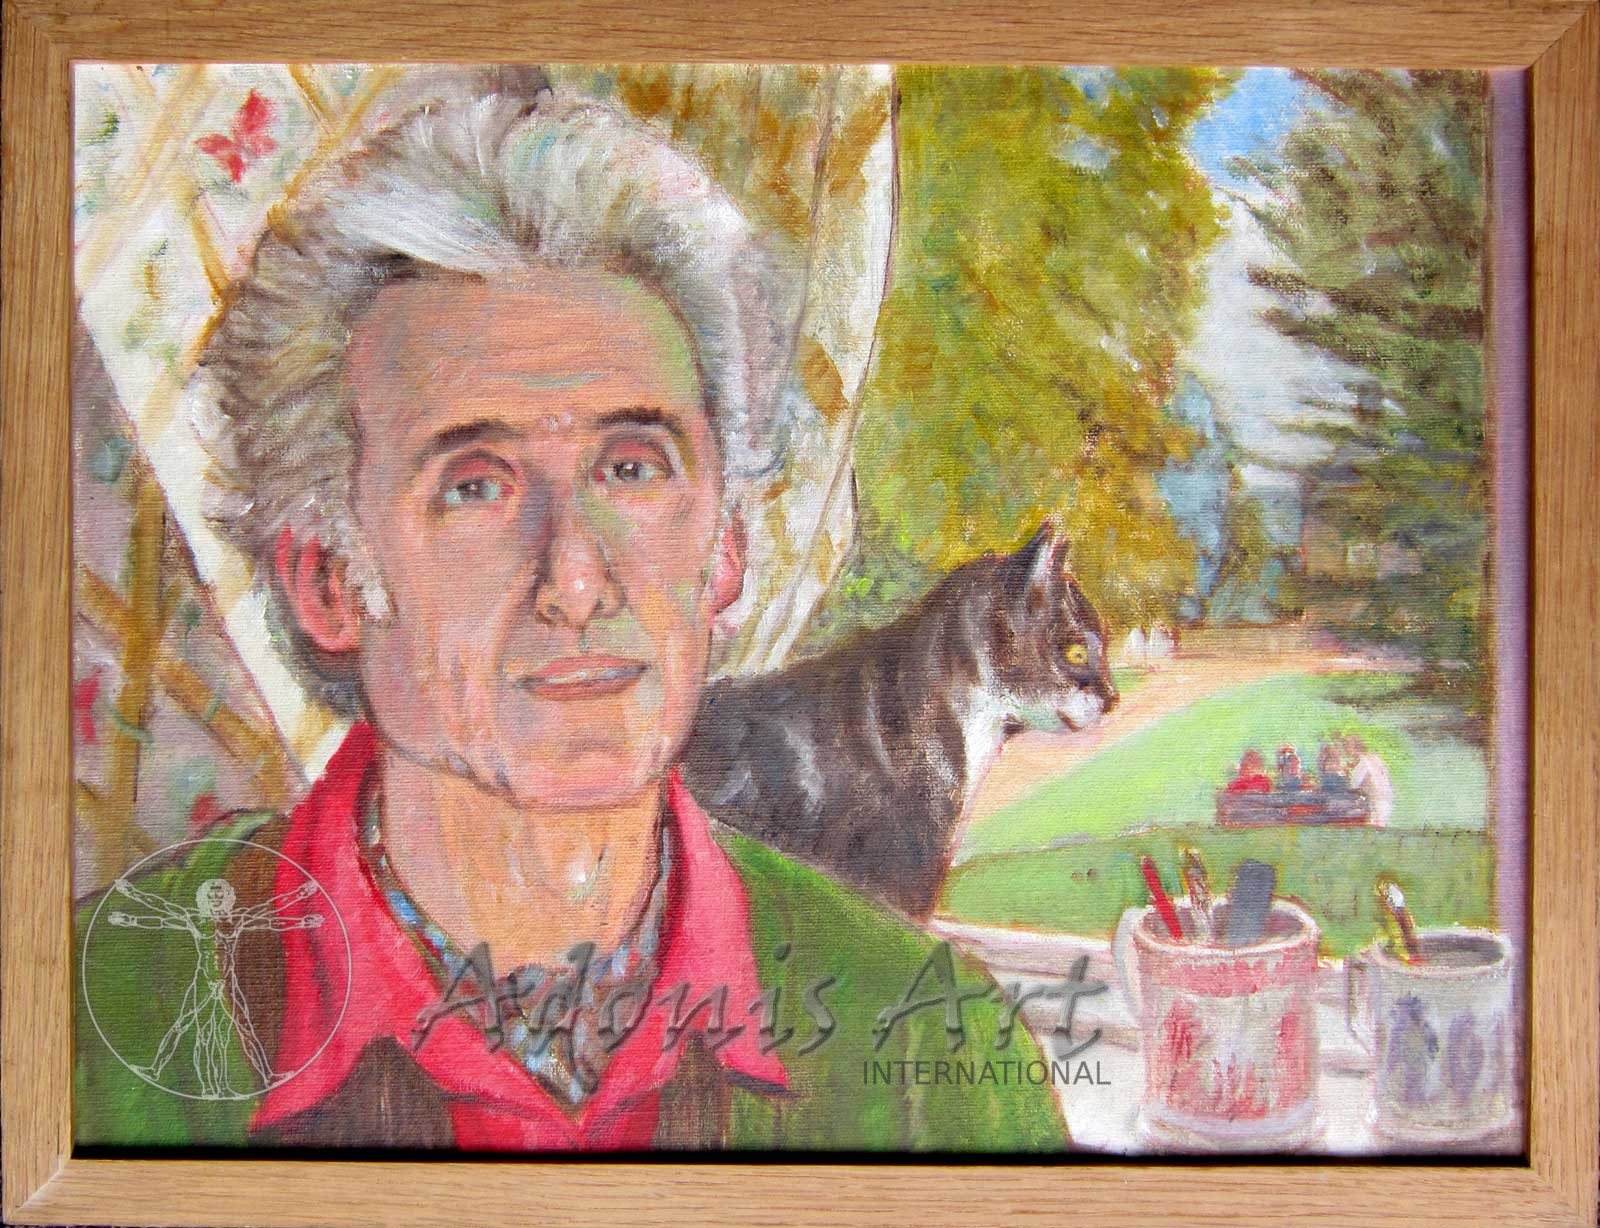 'Self Portrait with Cat' by Peter Samuelson